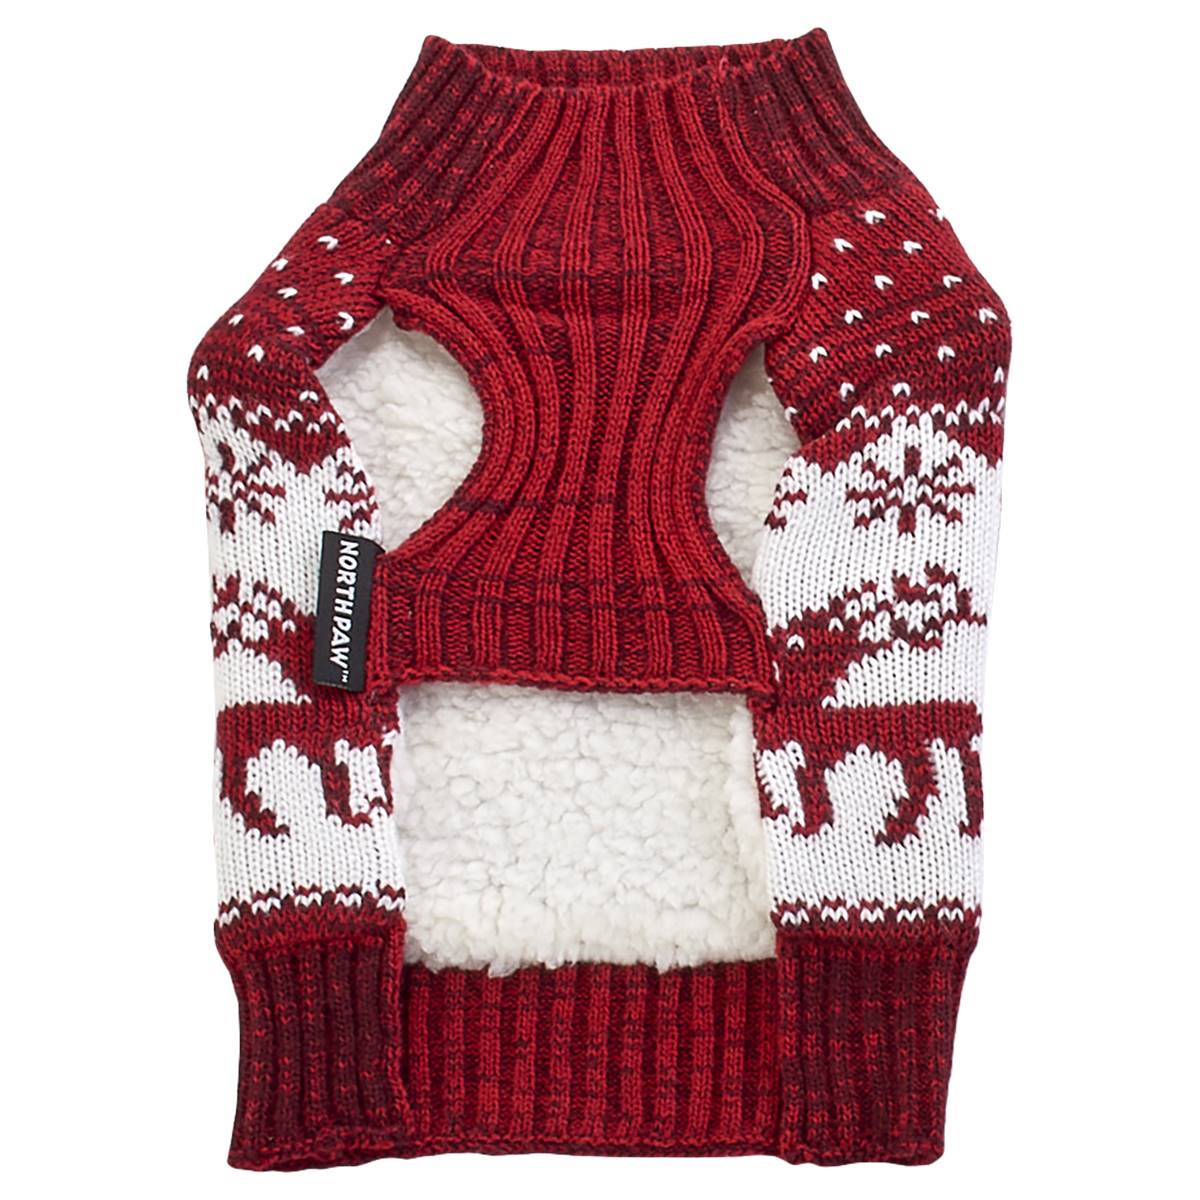 Northpaw Fair Isle Pet Sweater - Red